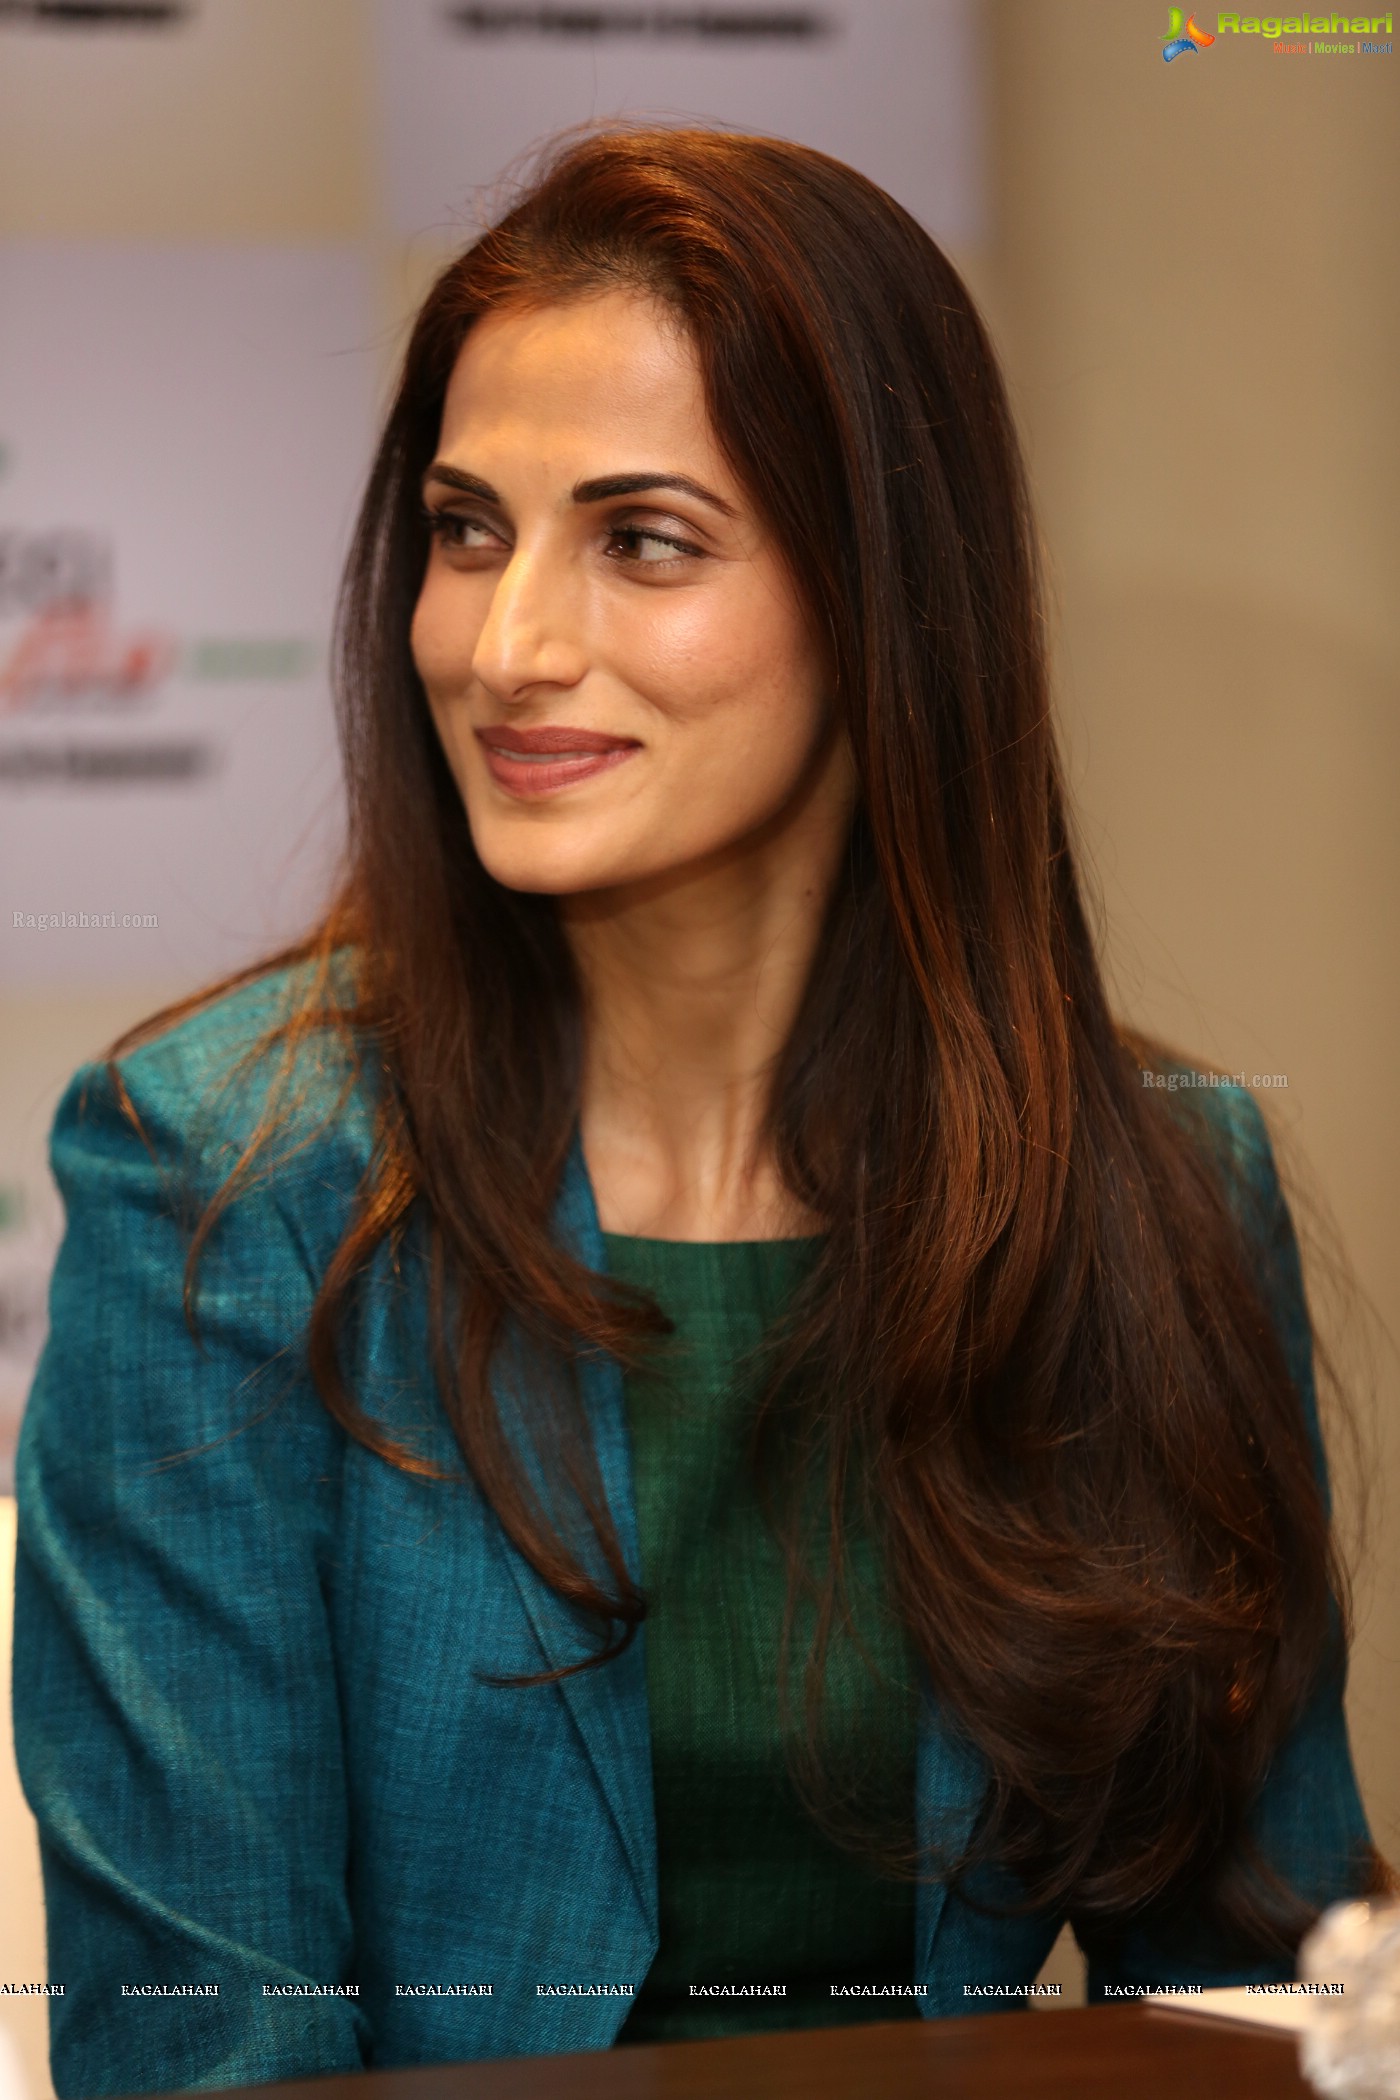 Shilpa Reddy at Young FICCI Ladies Organization (YFLO) Event, Hyderabad (Posters)